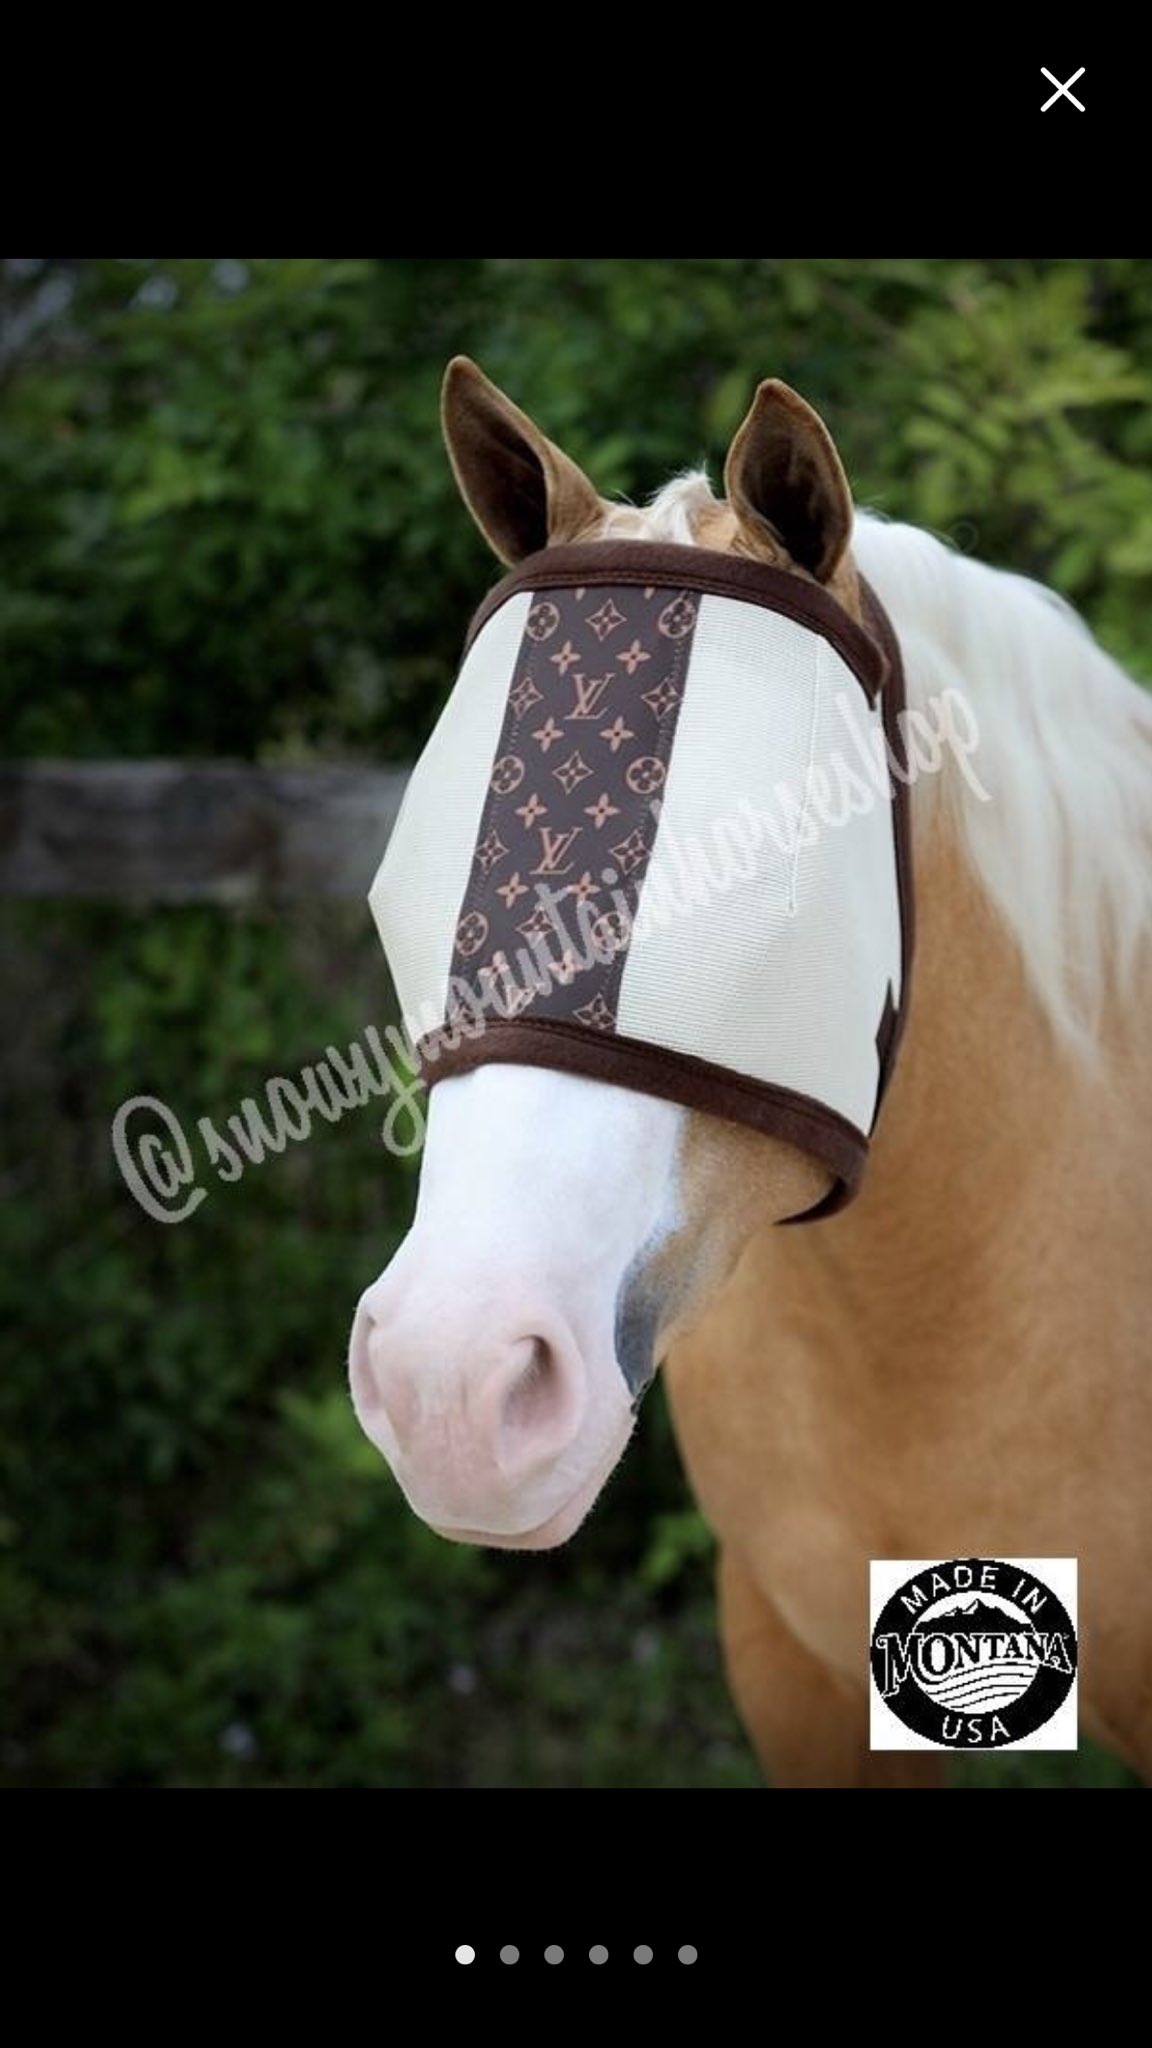 kindly myers on X: Just bought some fly masks for my new horse